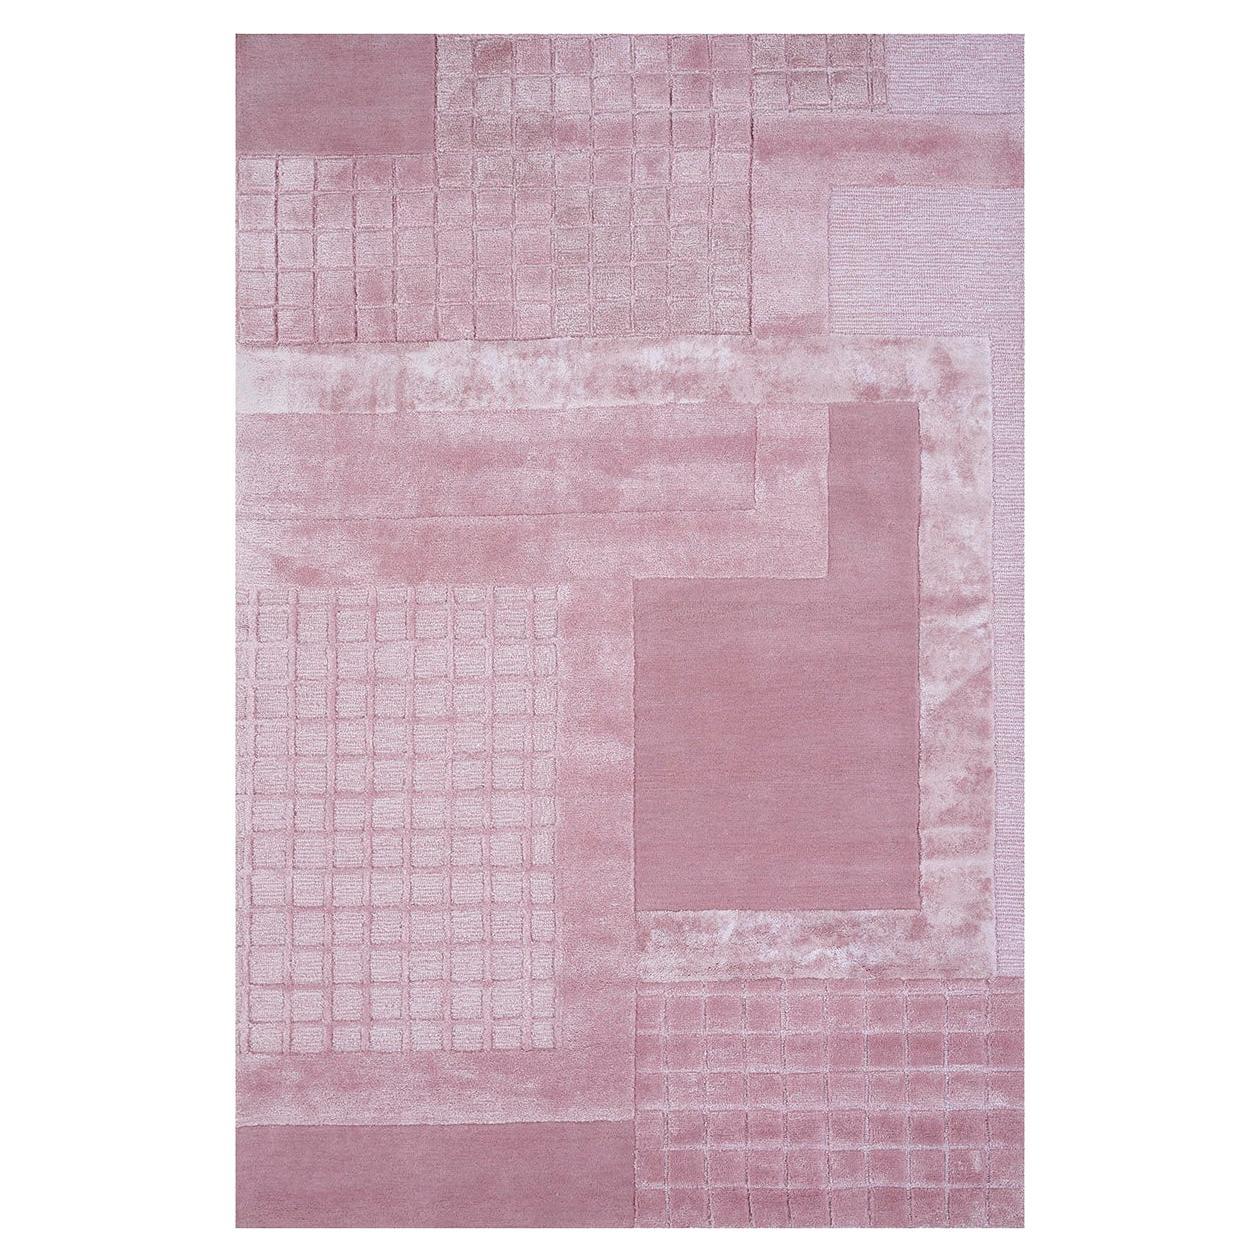 Rose City Rug by Rural Weavers, Tufted, Wool, Viscose, 180x270cm For Sale